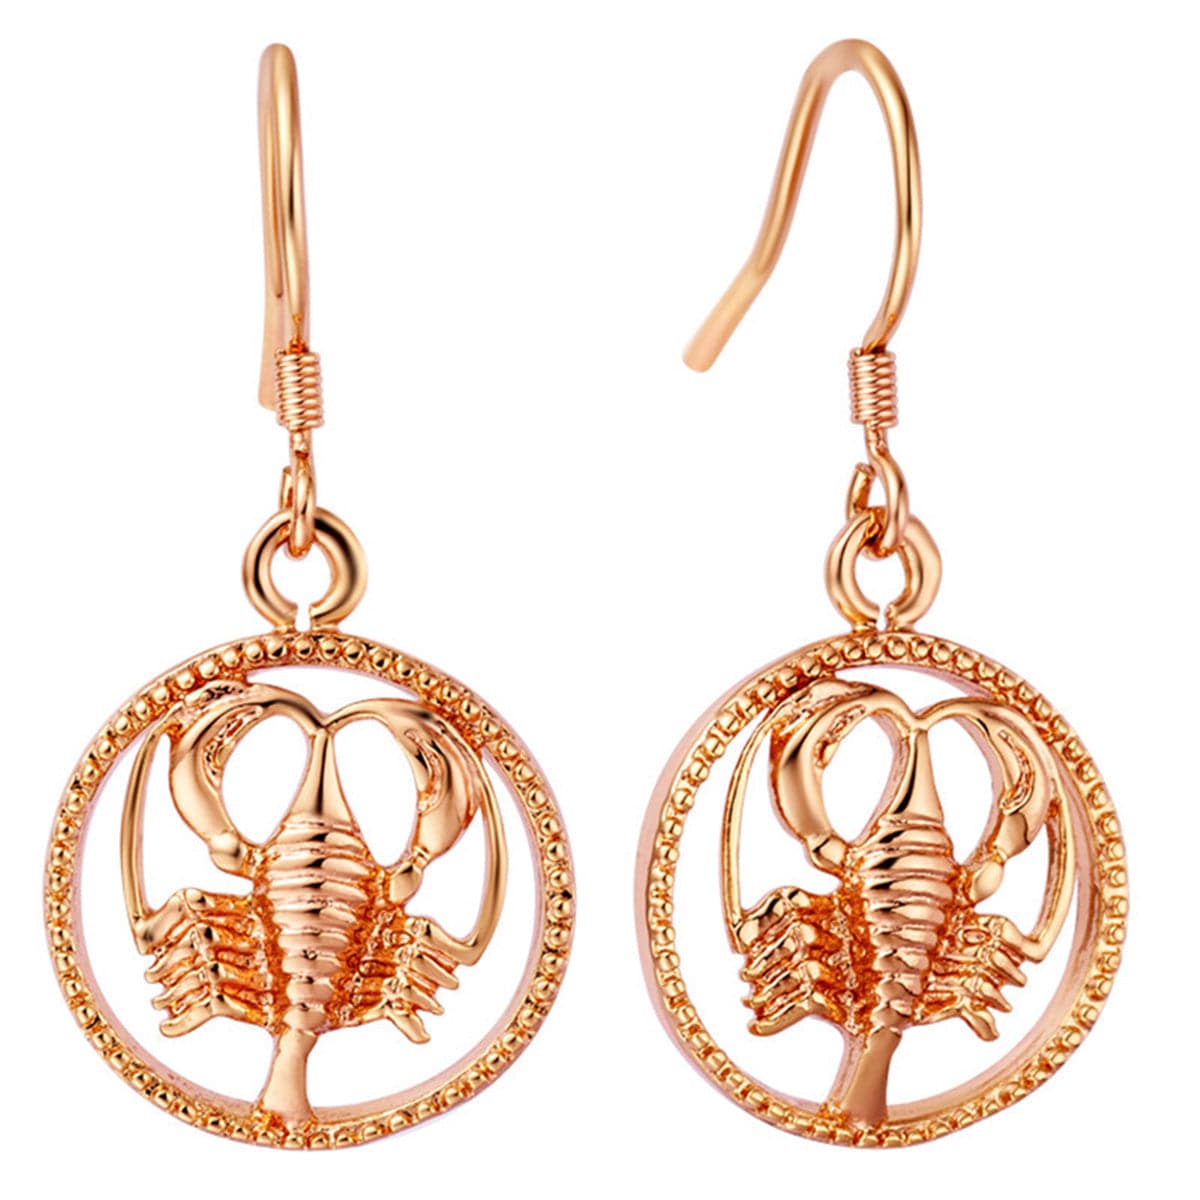 18K Rose Gold-Plated Constellation Drop Earrings